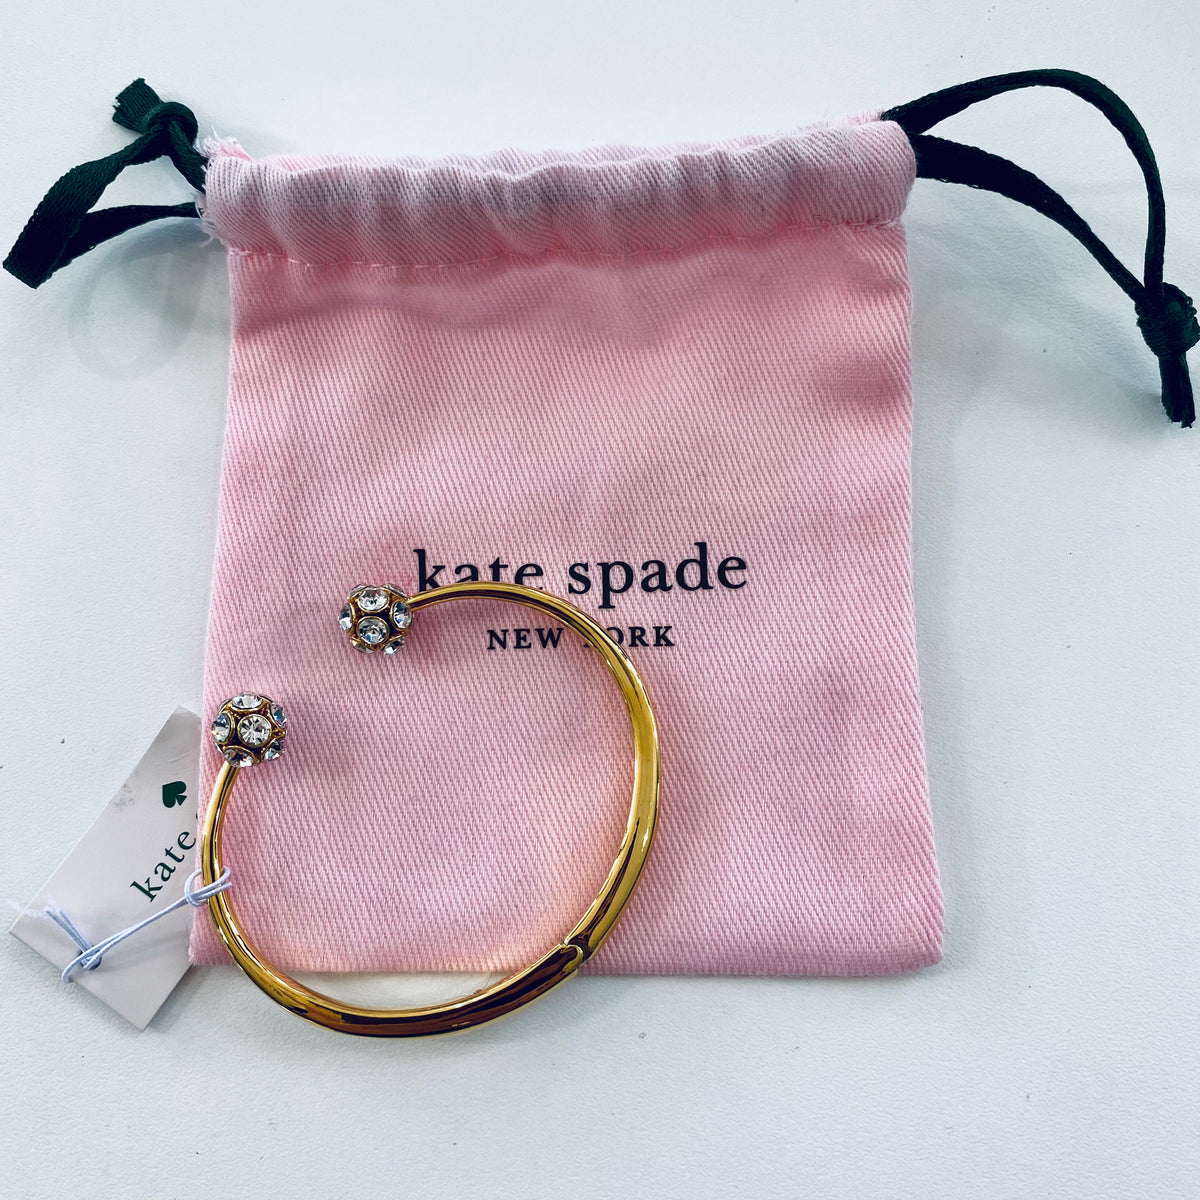 Authenticate This KATE SPADE, Page 389